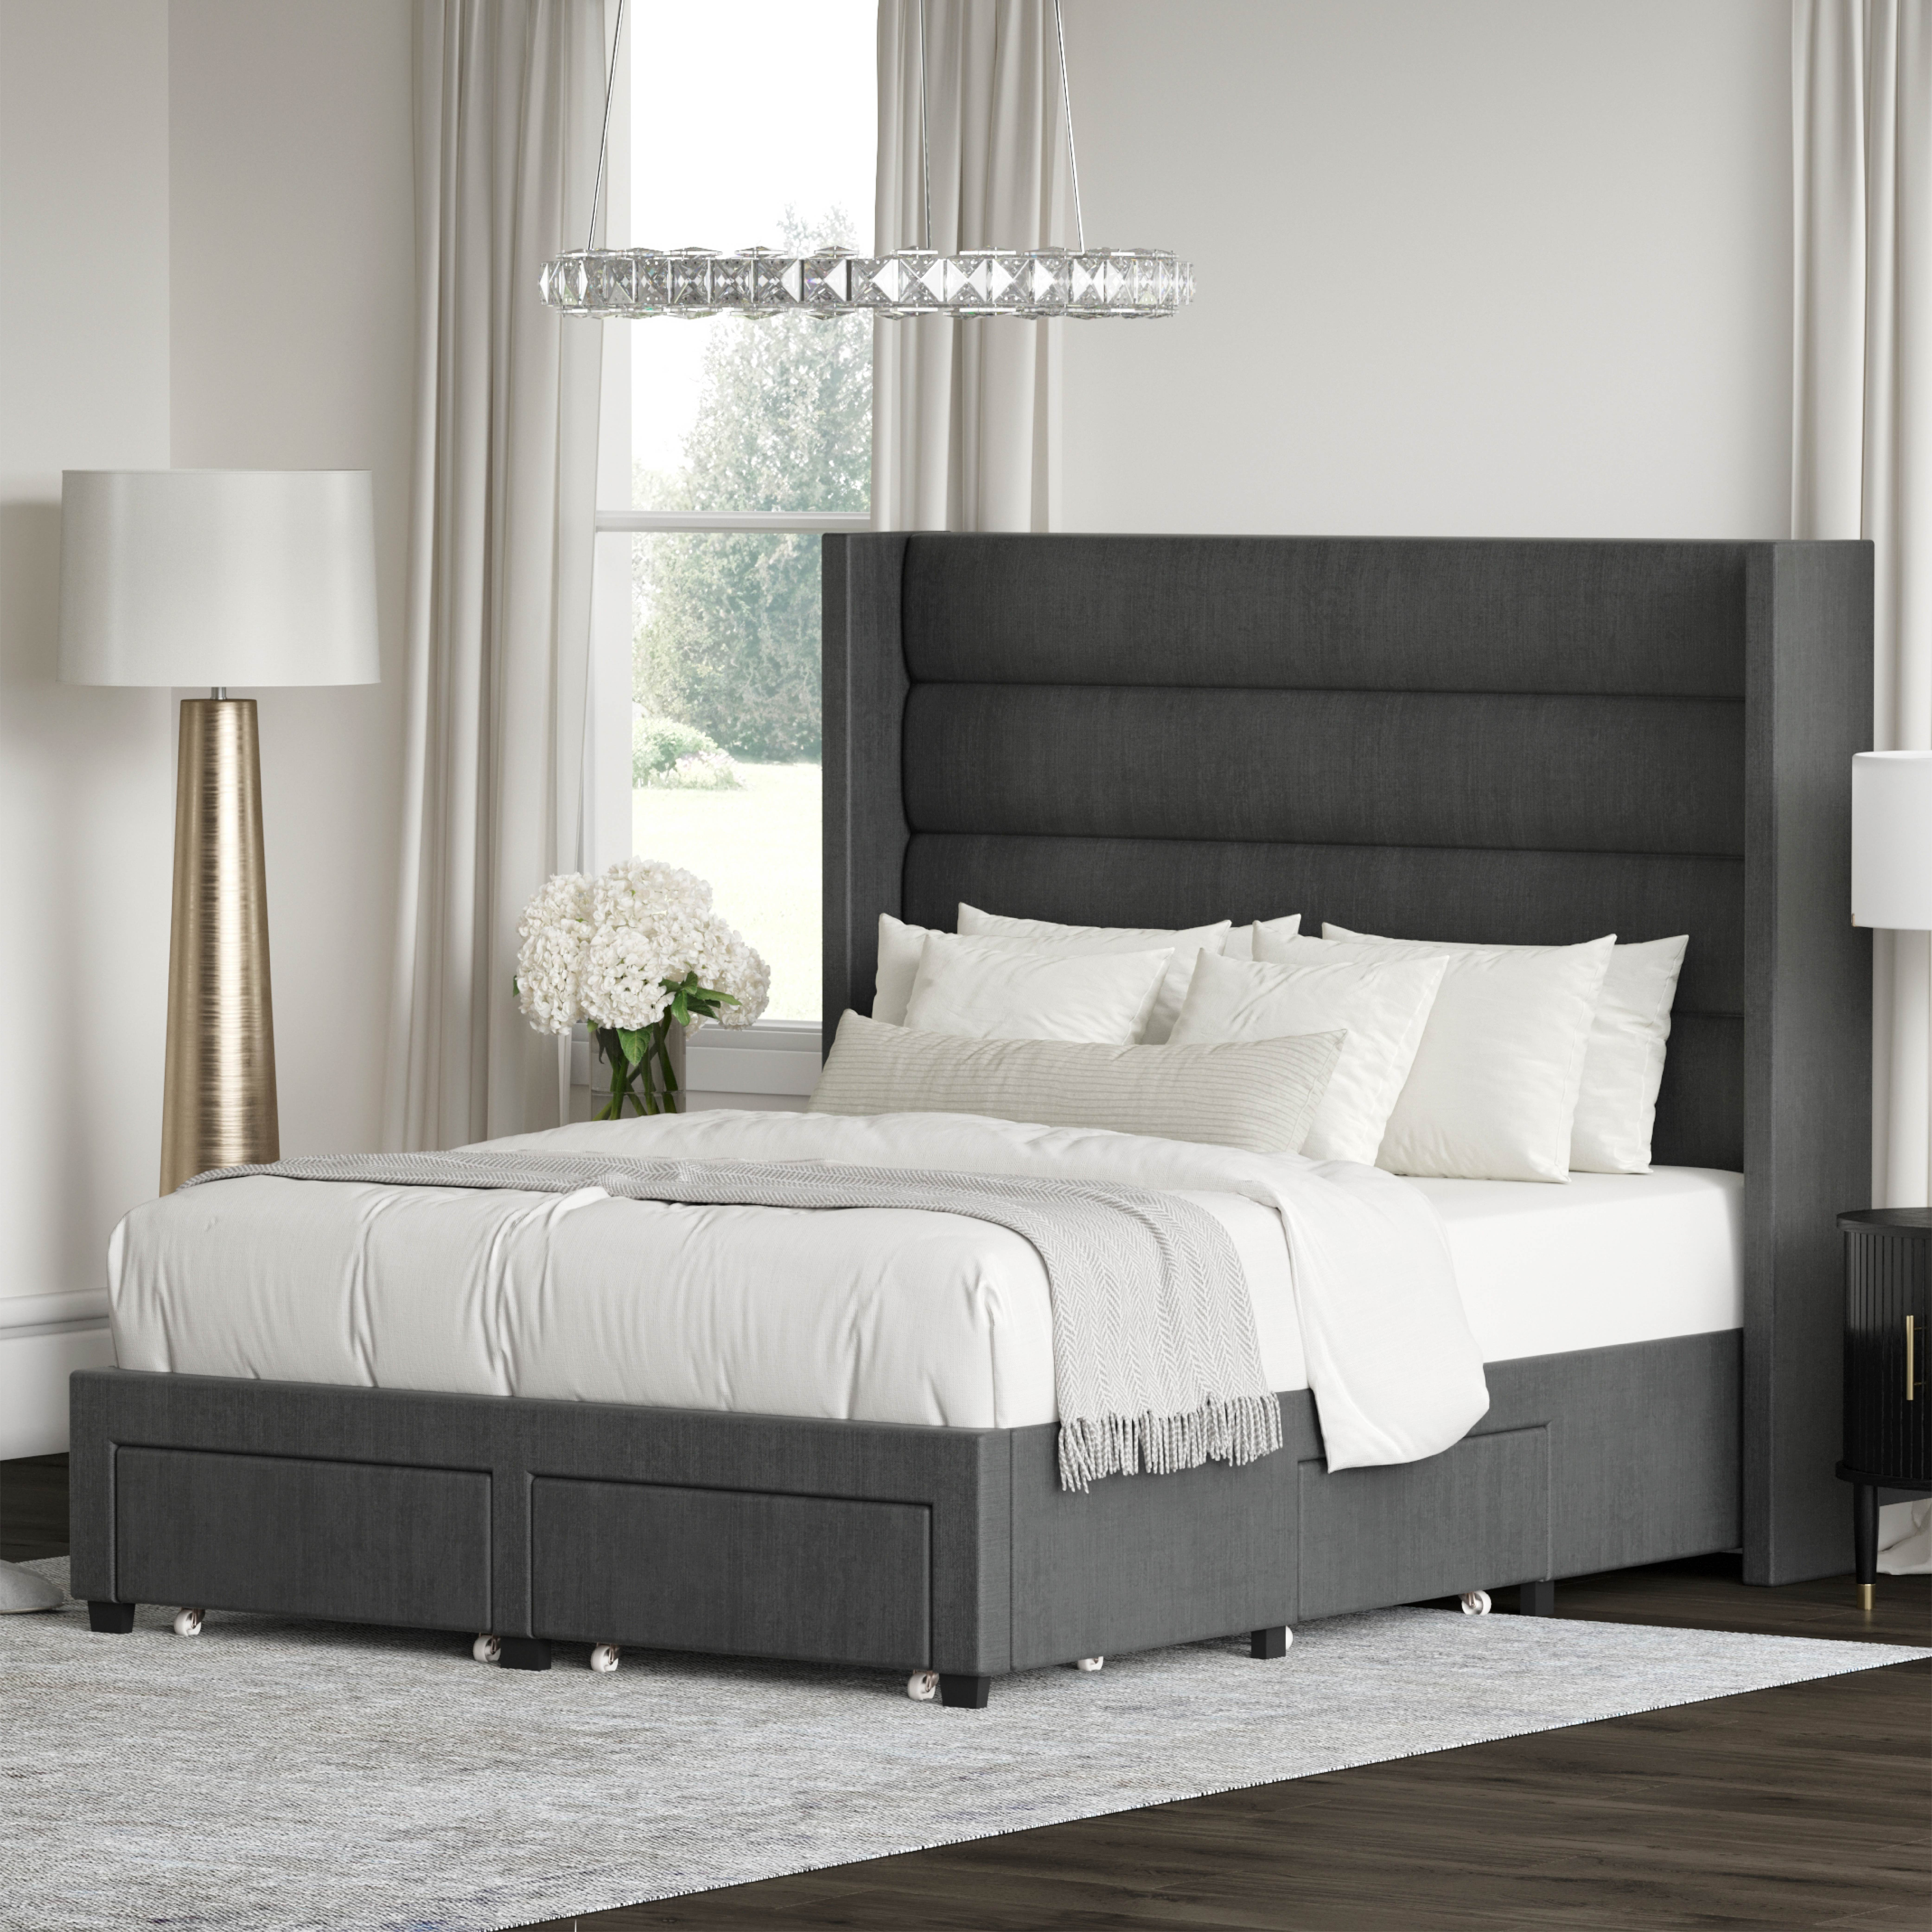 DG Casa George Modern Queen Size Bed Frame - Wooden Platform Bed Frame With Tall Tufted Horizontal Channel Wingback Headboard - Box Spring Needed - Upholstered Panel Bed Frame With Storage - Charcoal - image 1 of 9